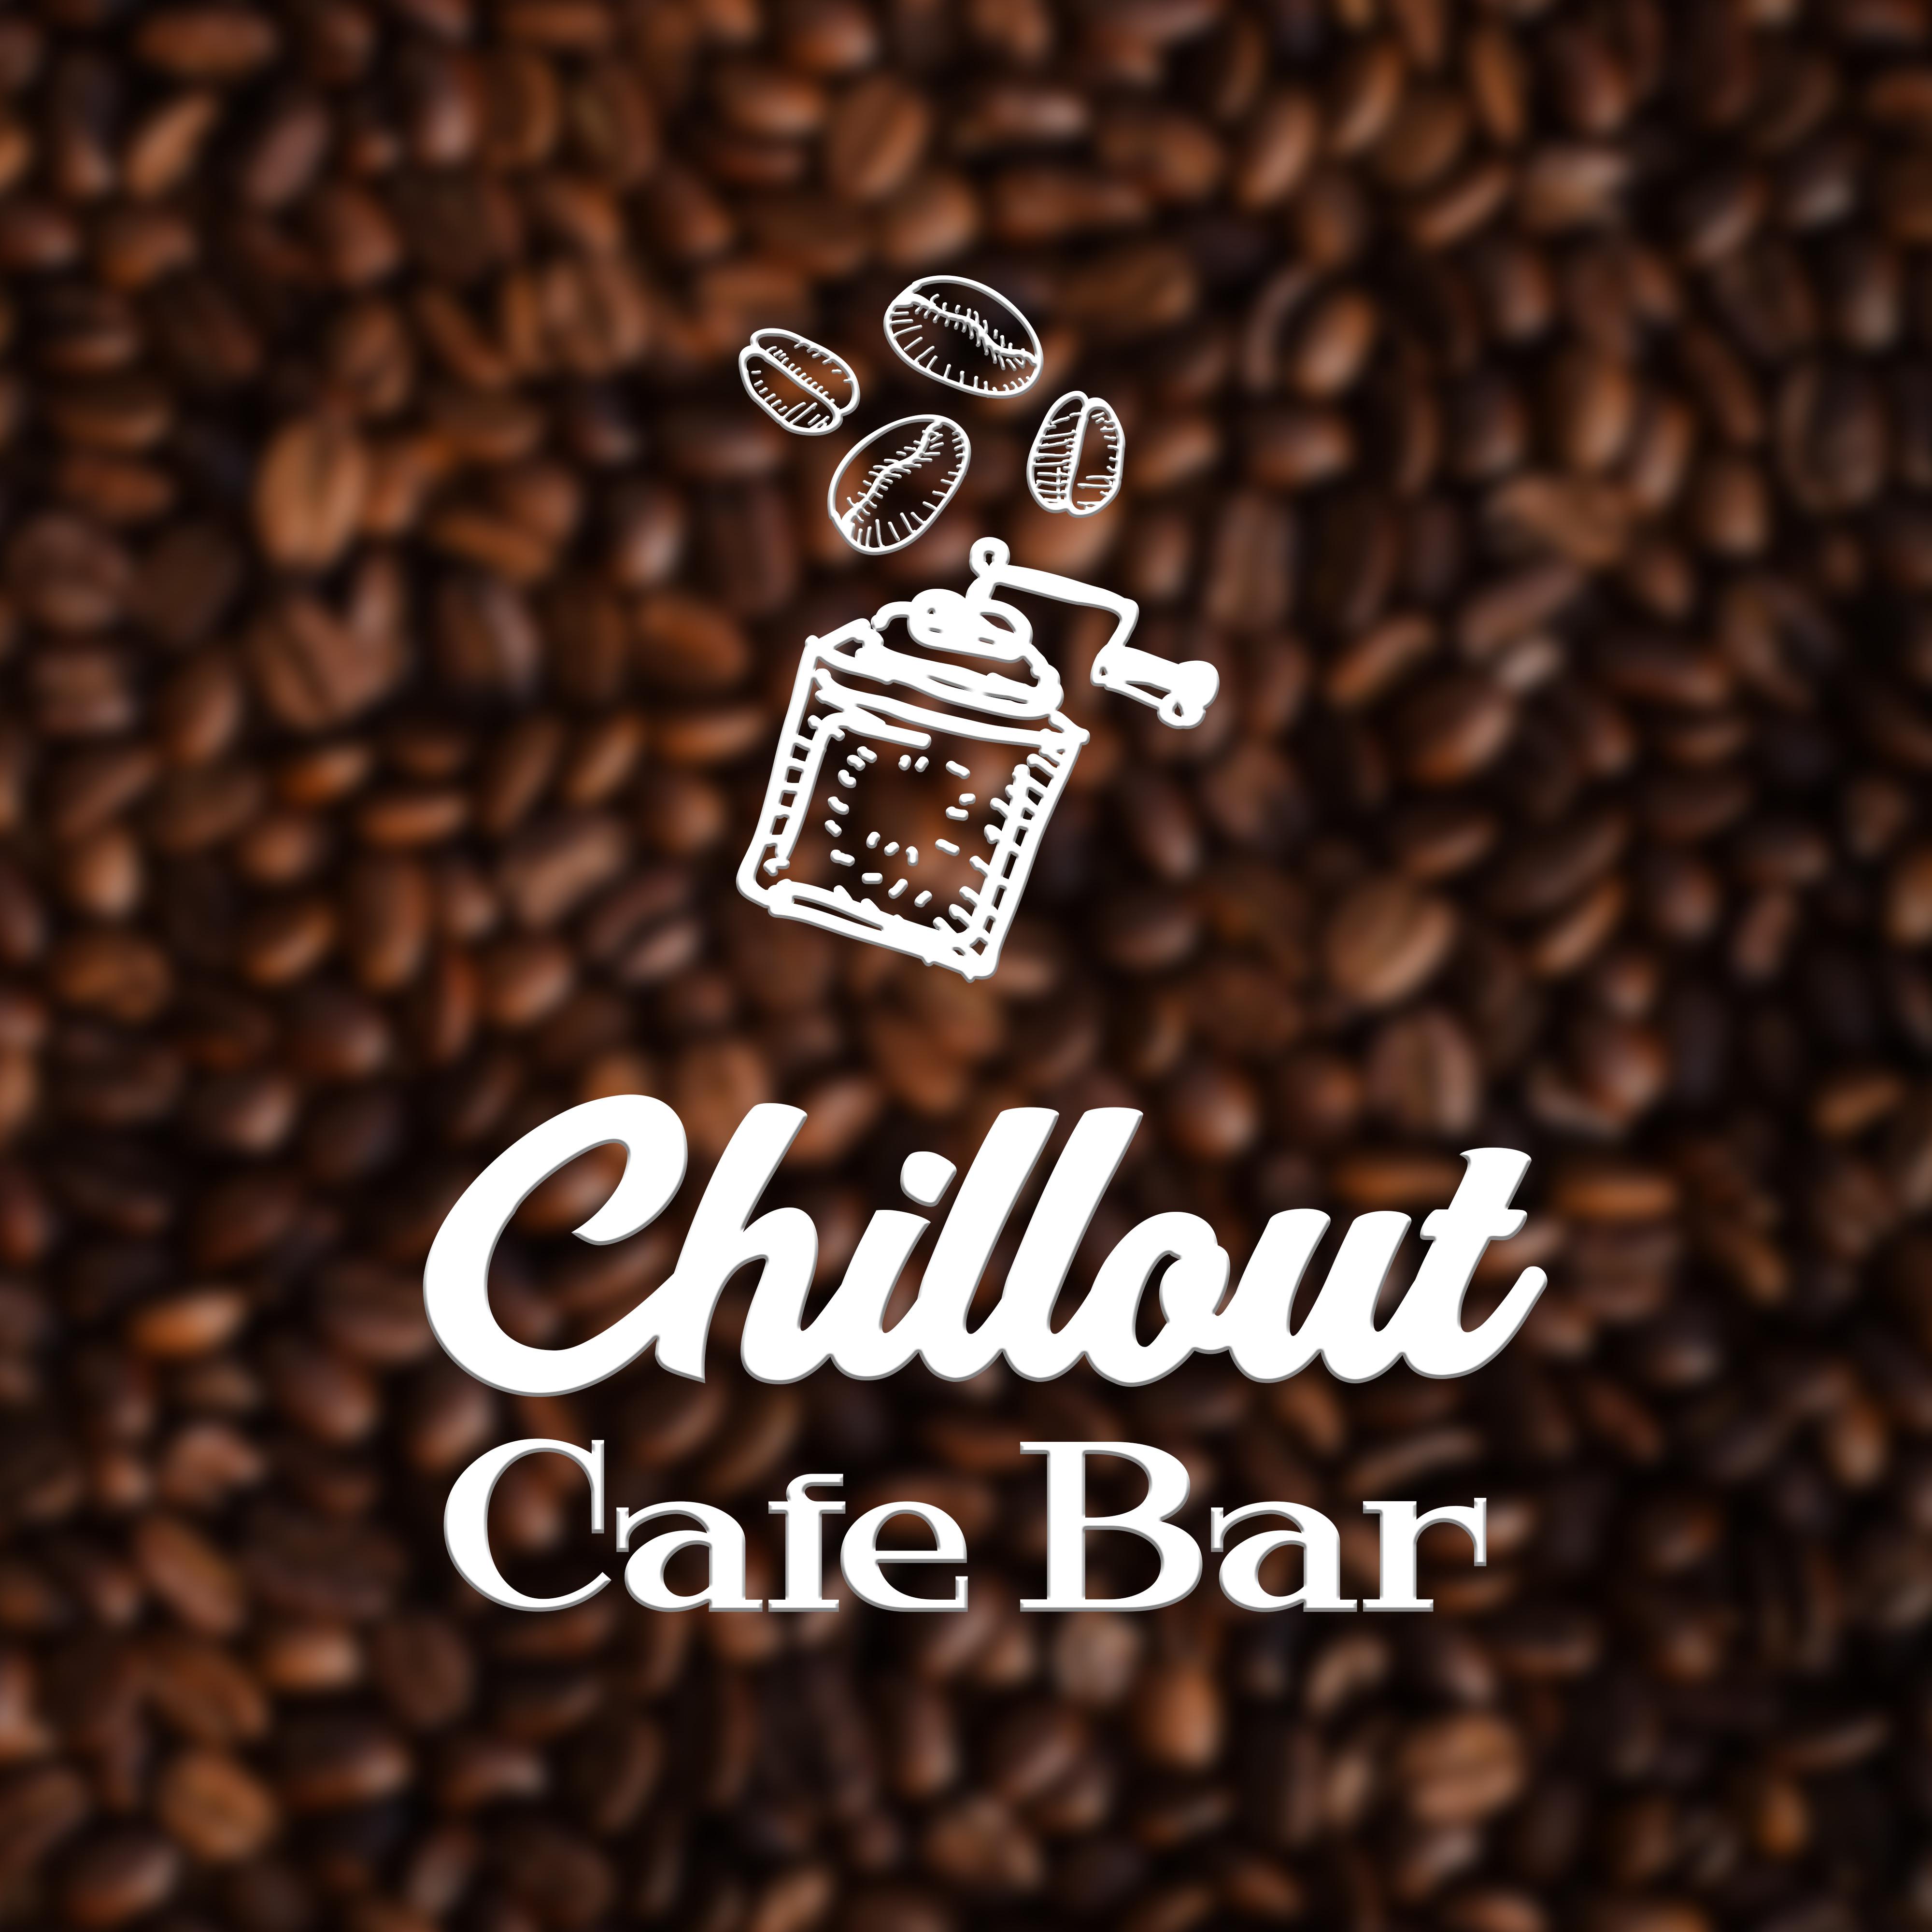 Chillout Cafe Bar – Relax & Chill,Chillout Music for Cafe, Coffee Talk, Smooth Vibes